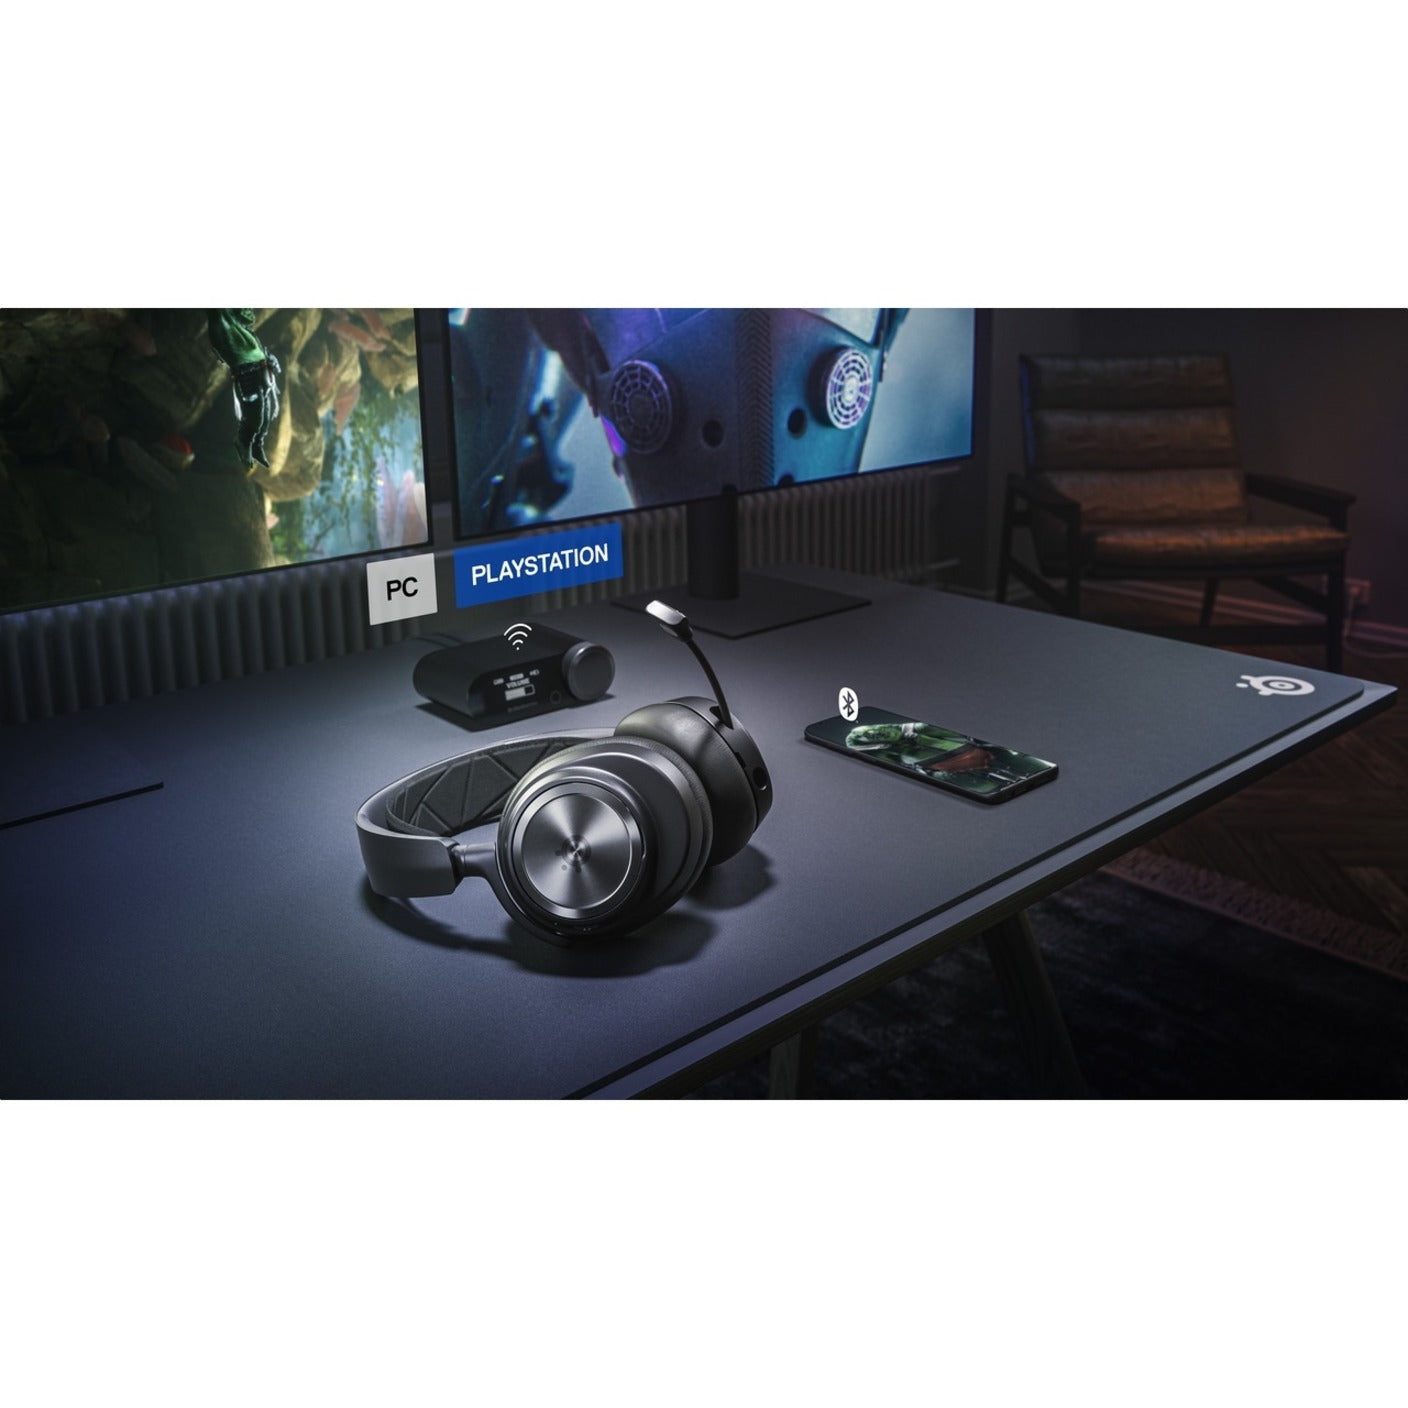 SteelSeries 61528 Arctis Nova Pro Gaming Headset, Stereo Sound, Noise Cancelling Microphone